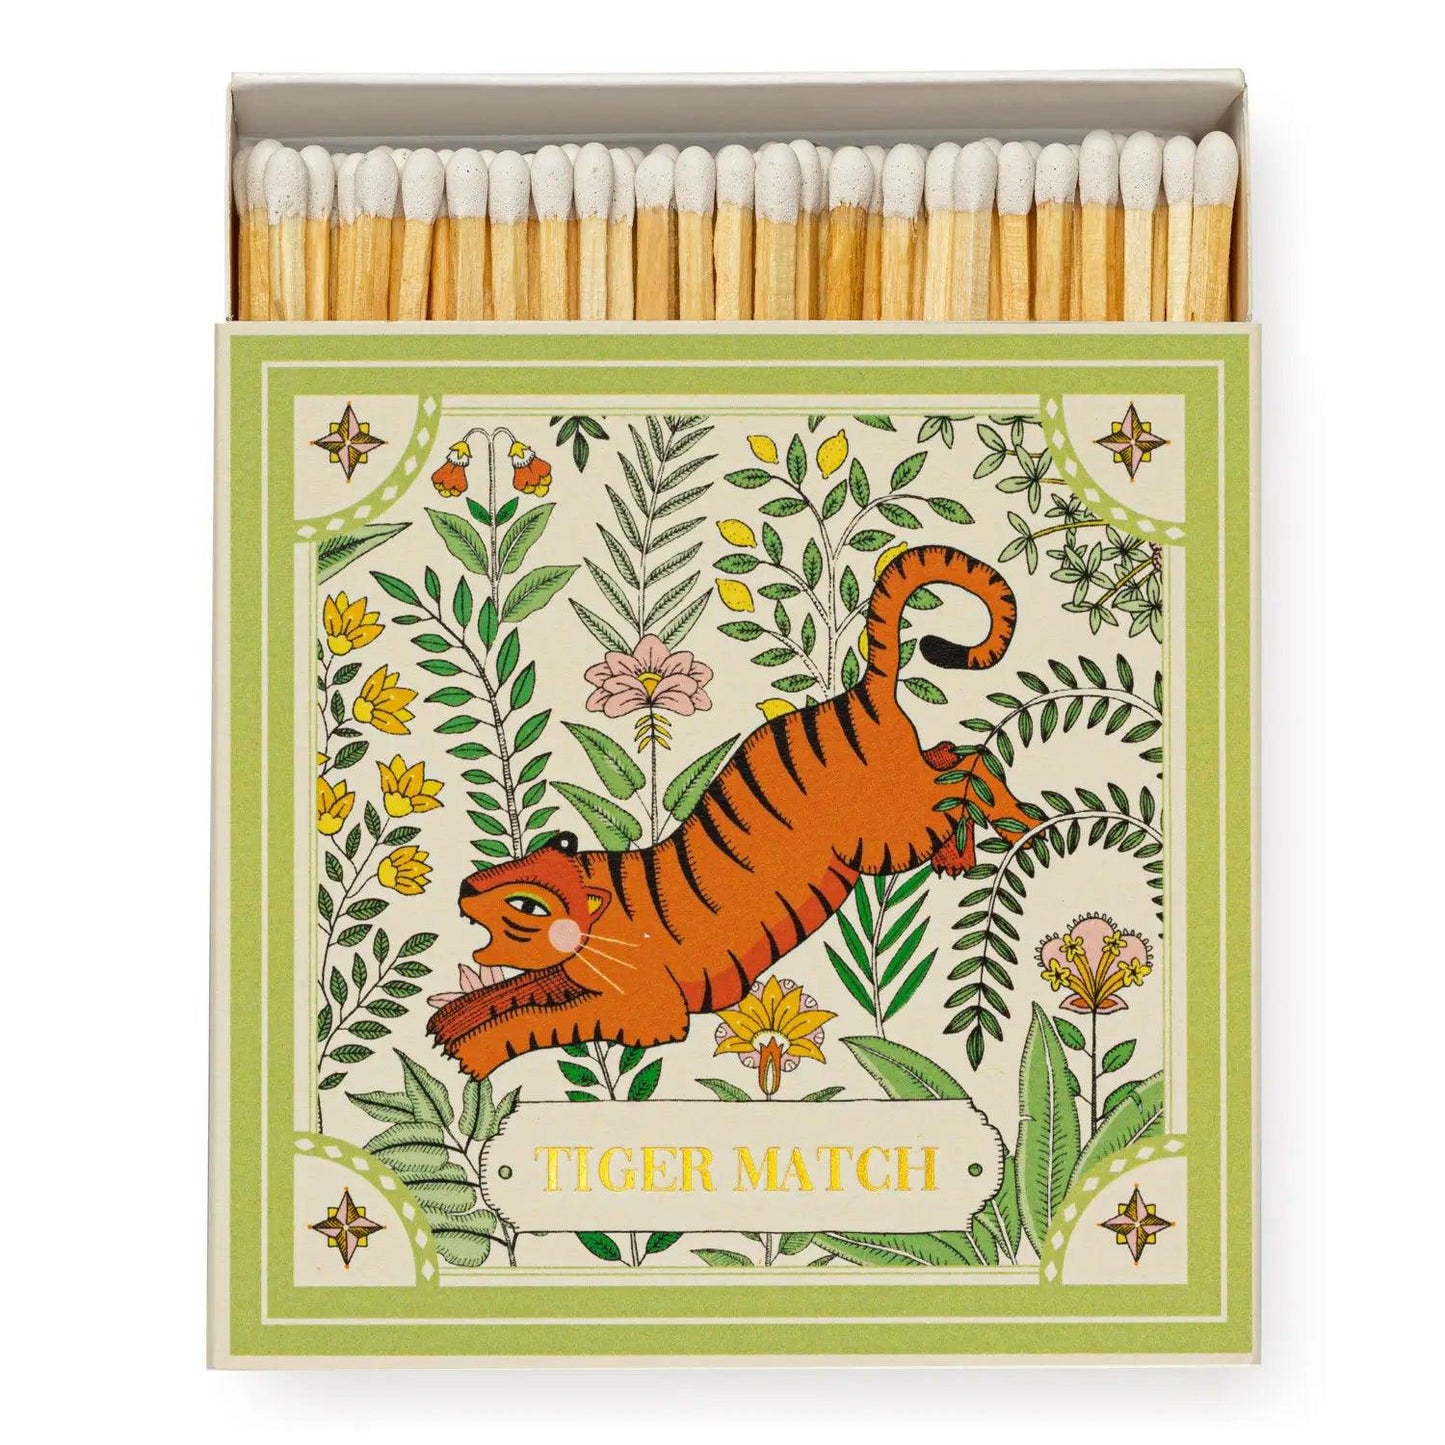 Assorted Vintage Style Match Box